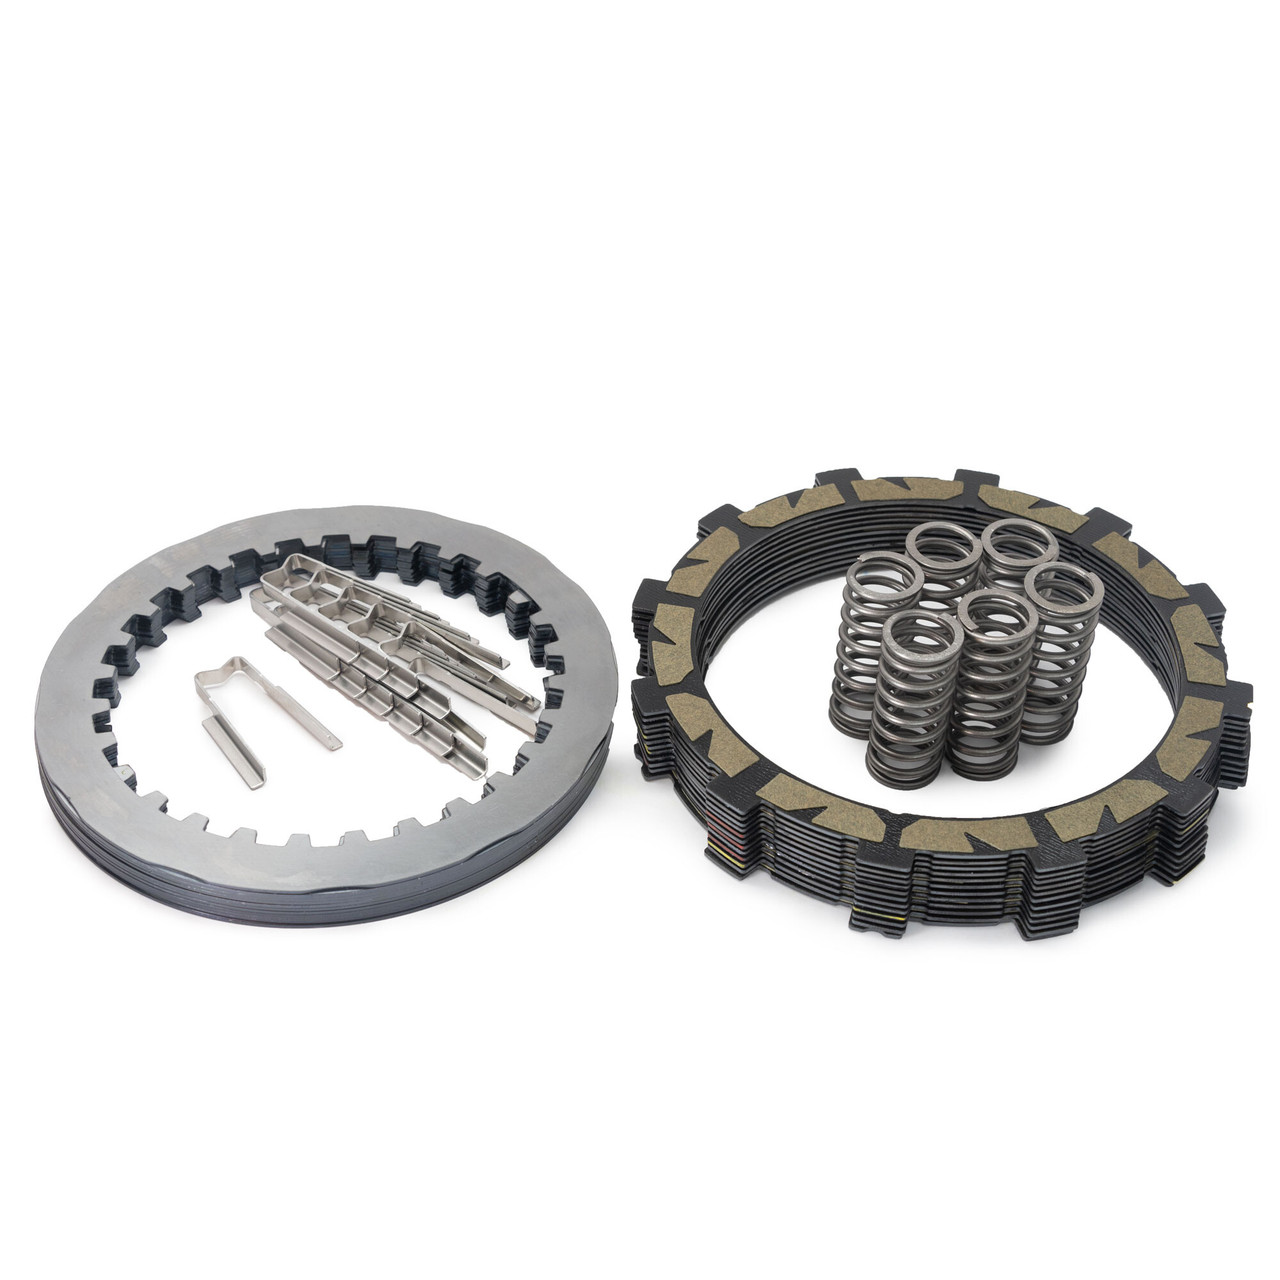 Rekluse Racing New TorqDrive Clutch Pack, 156-2213